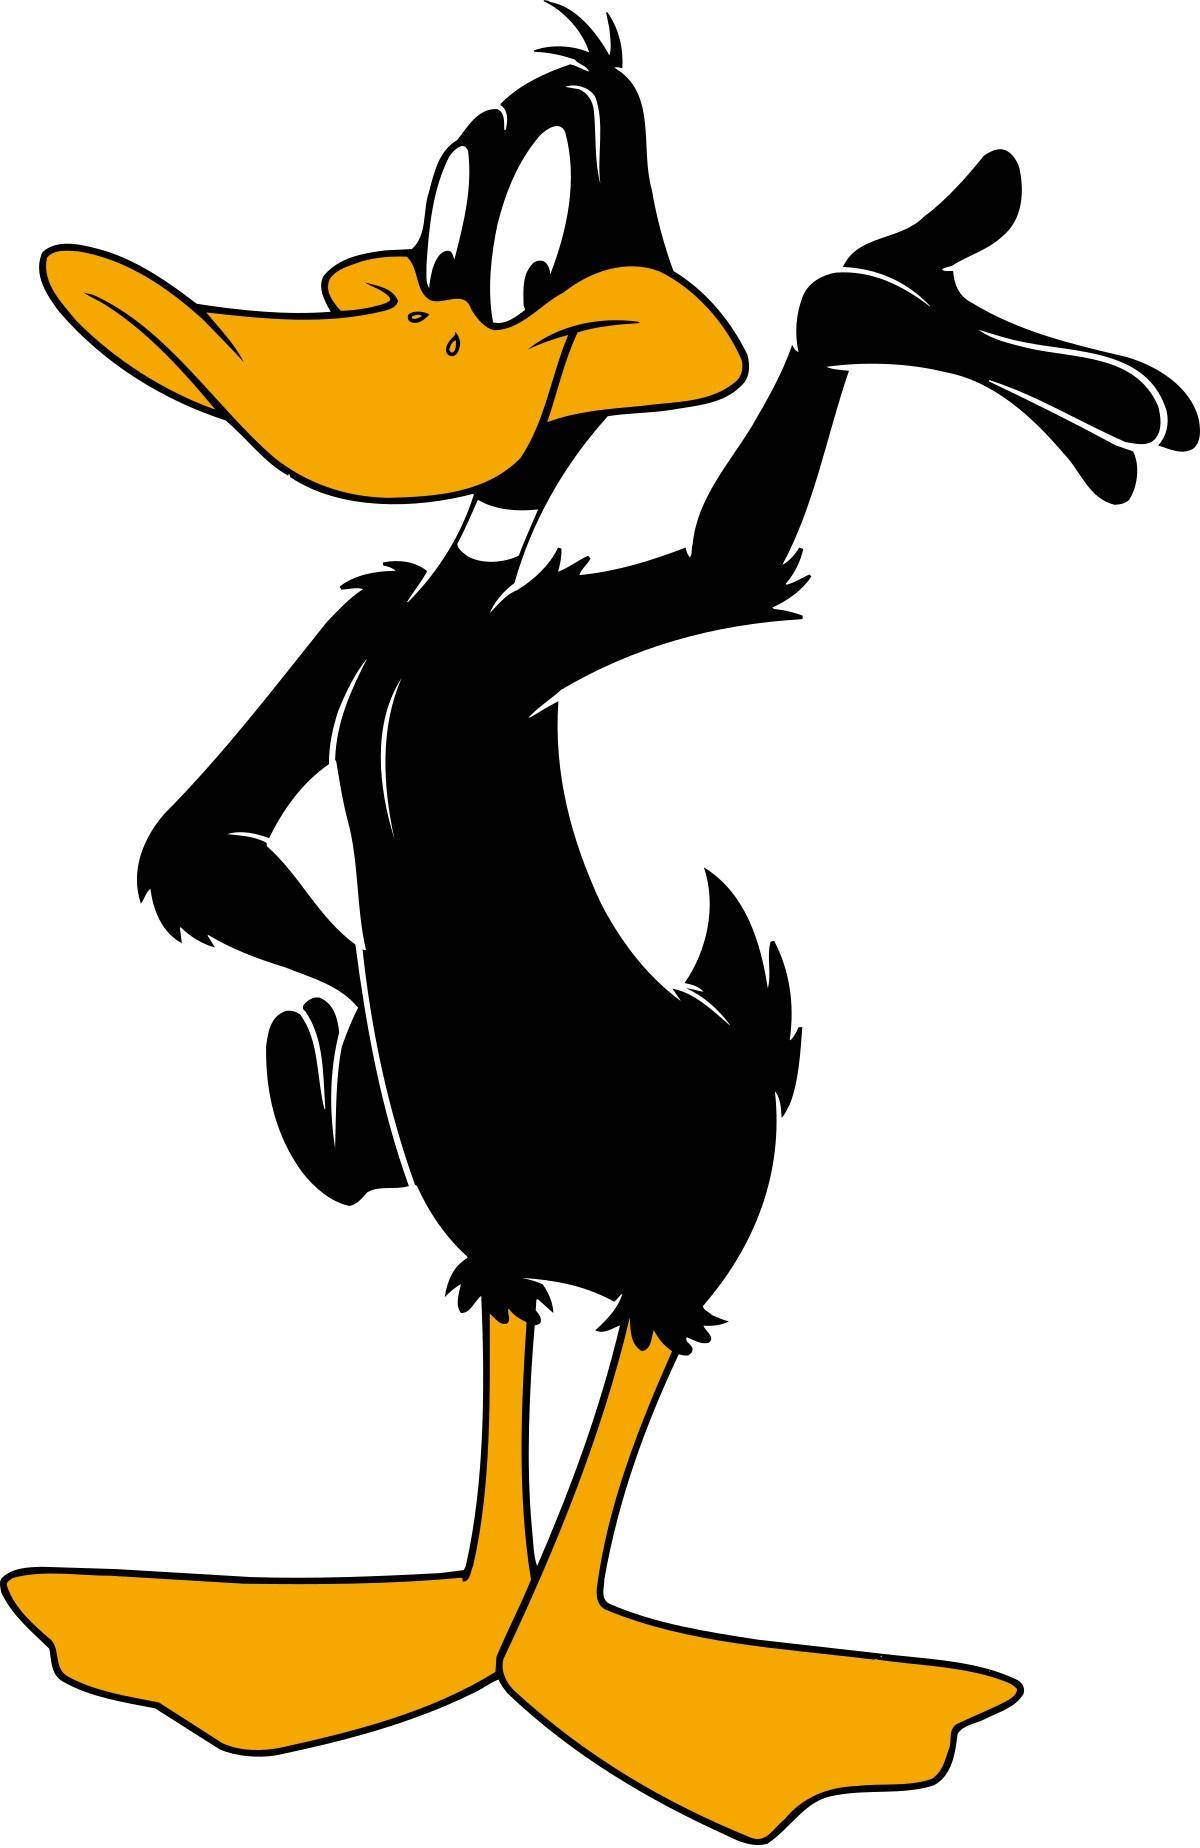 Simple Daffy Duck Poster Wallpaper